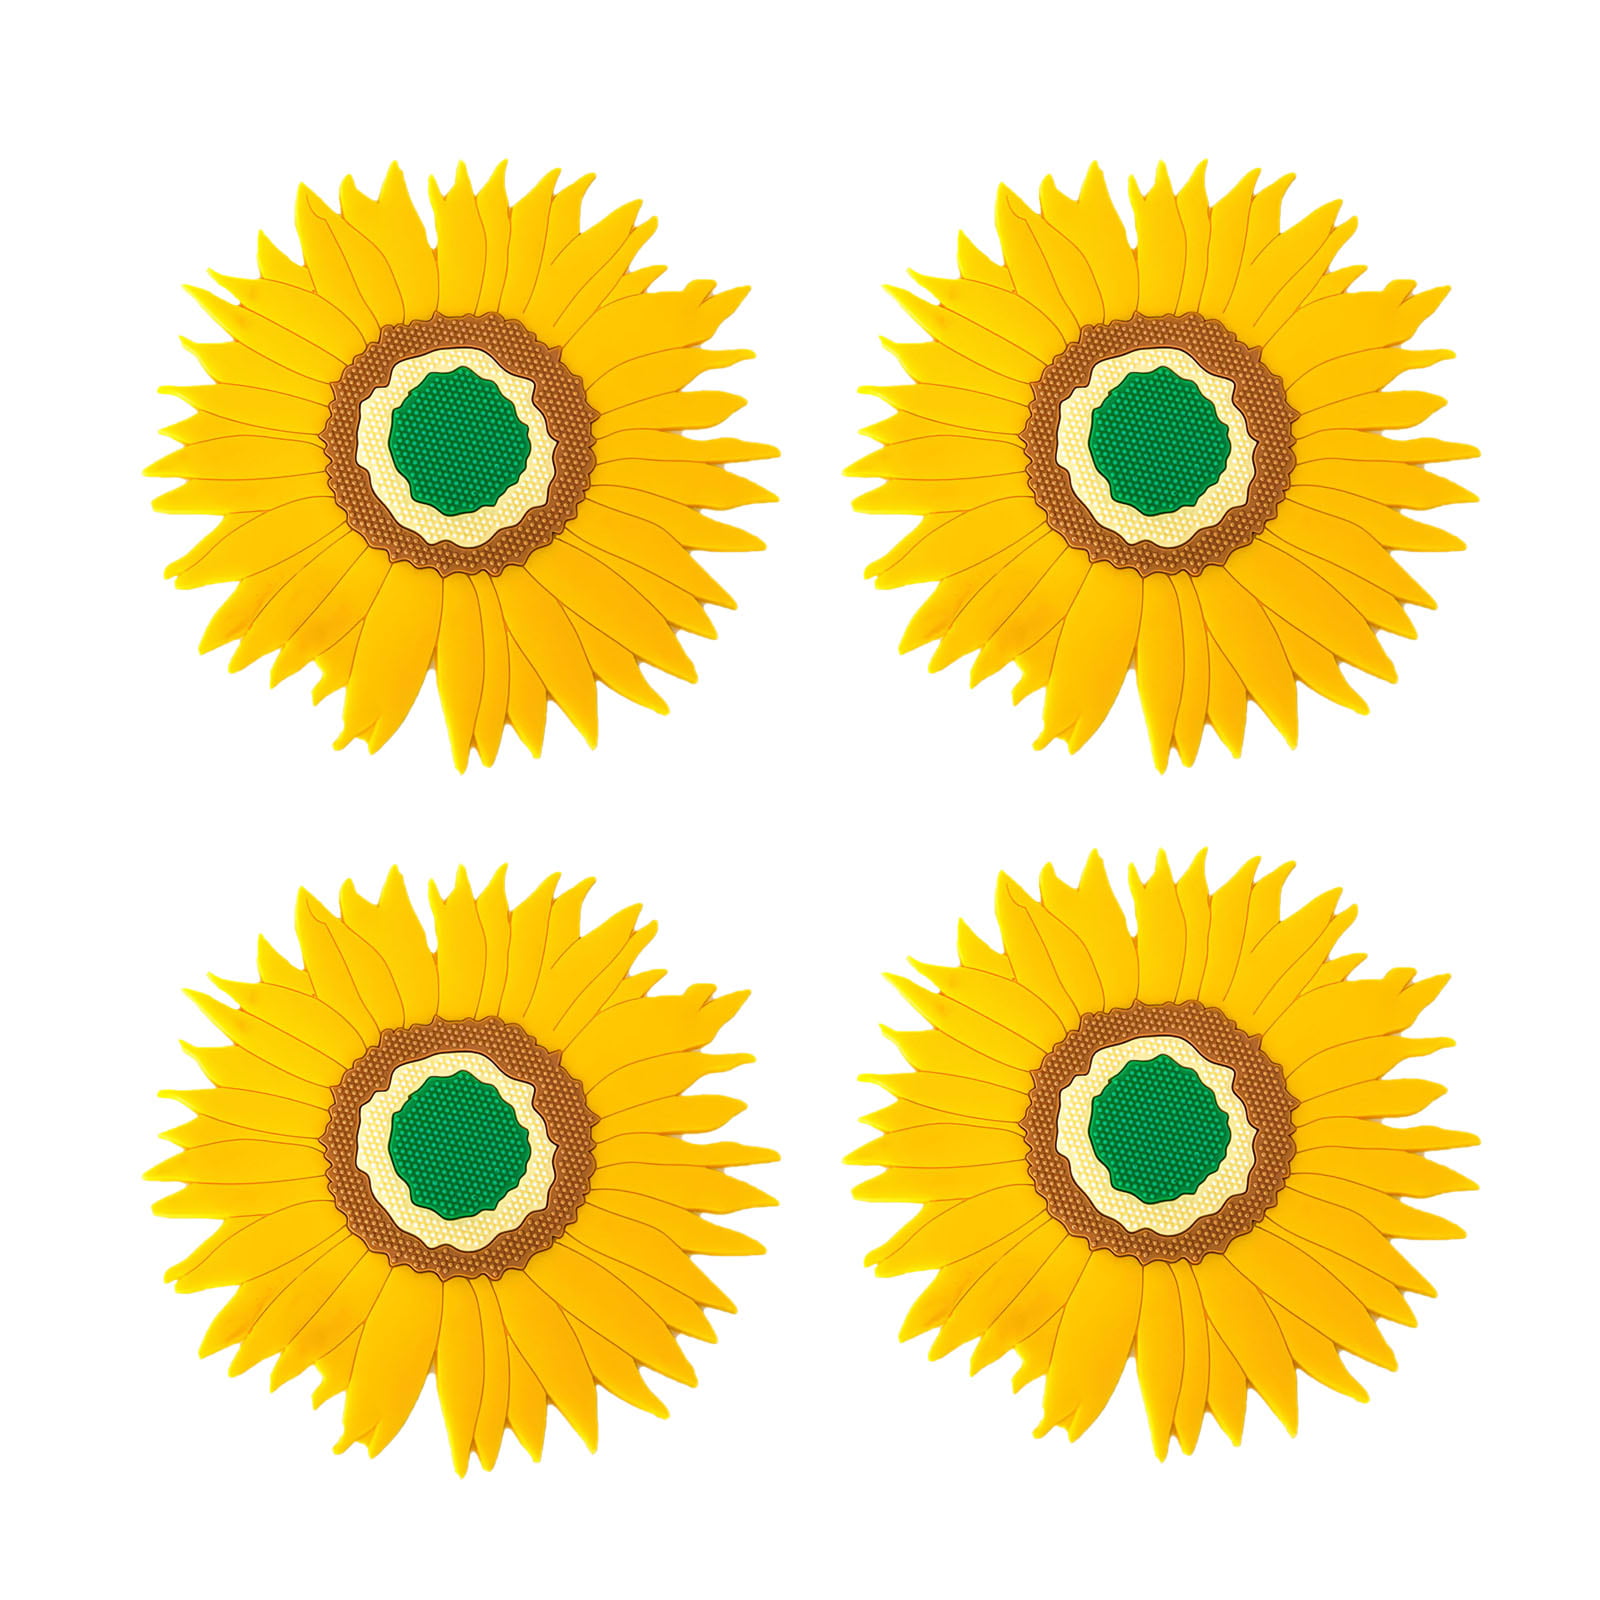 Great Gift Idea 4 pack Sunflowers Square Rubber Coaster set